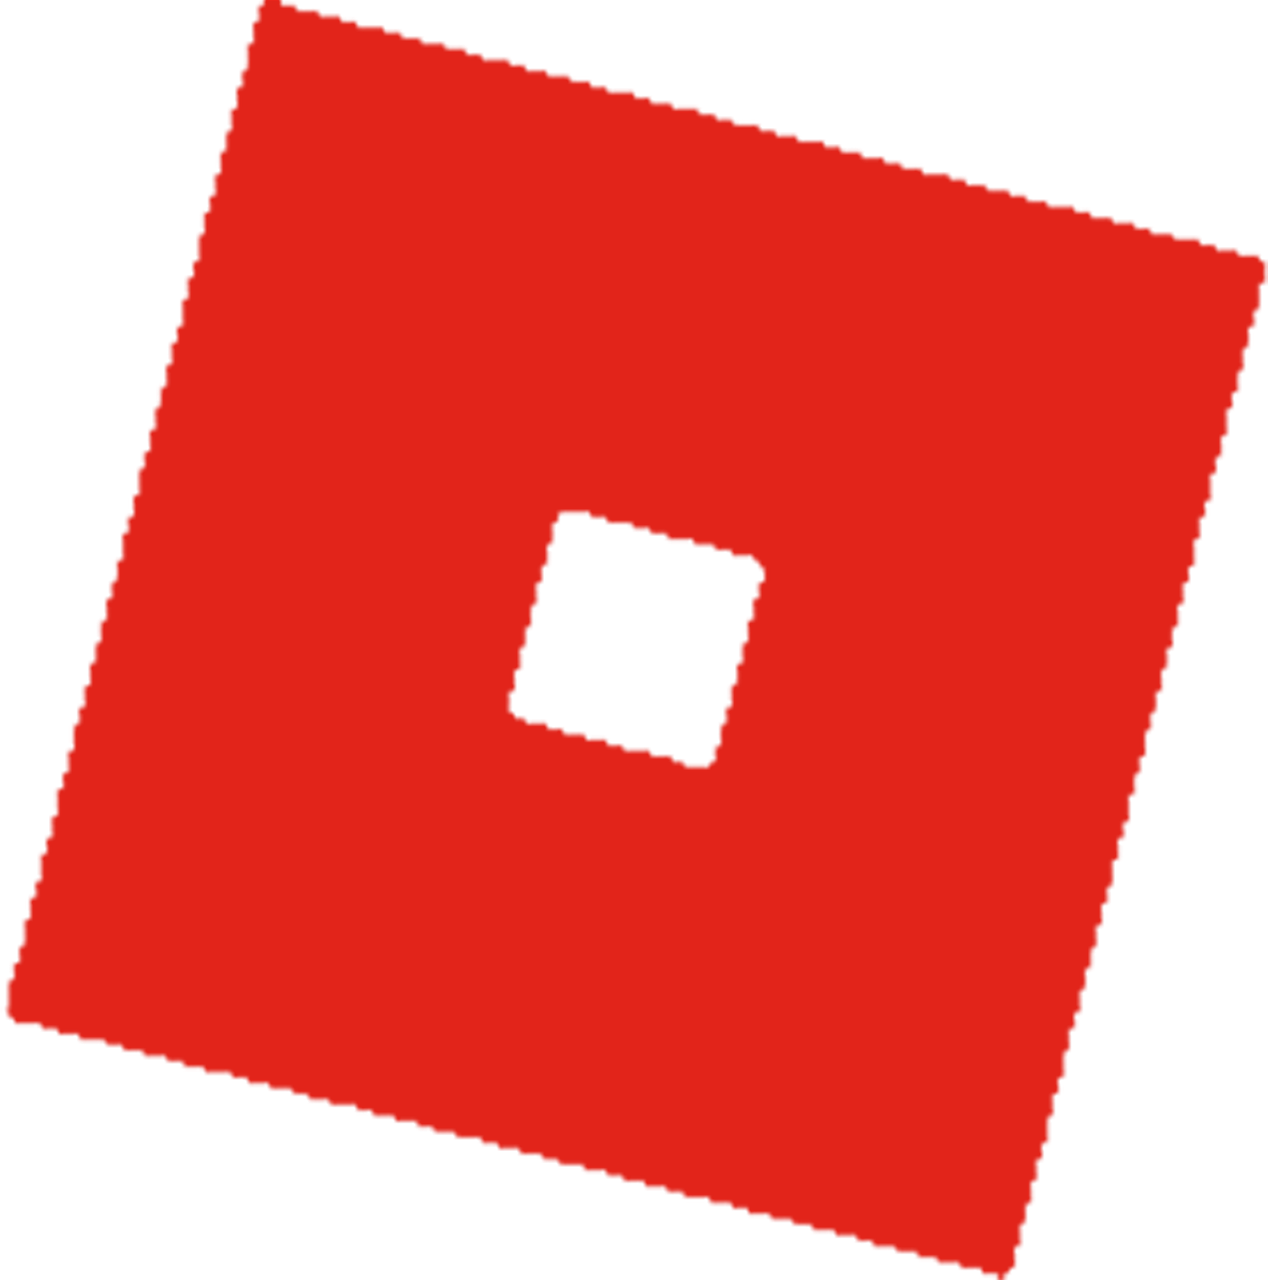 Download Roblox Logo Line Minecraft Red Free Clipart Hq Hq Png Image Freepngimg - roblox logo png 2019